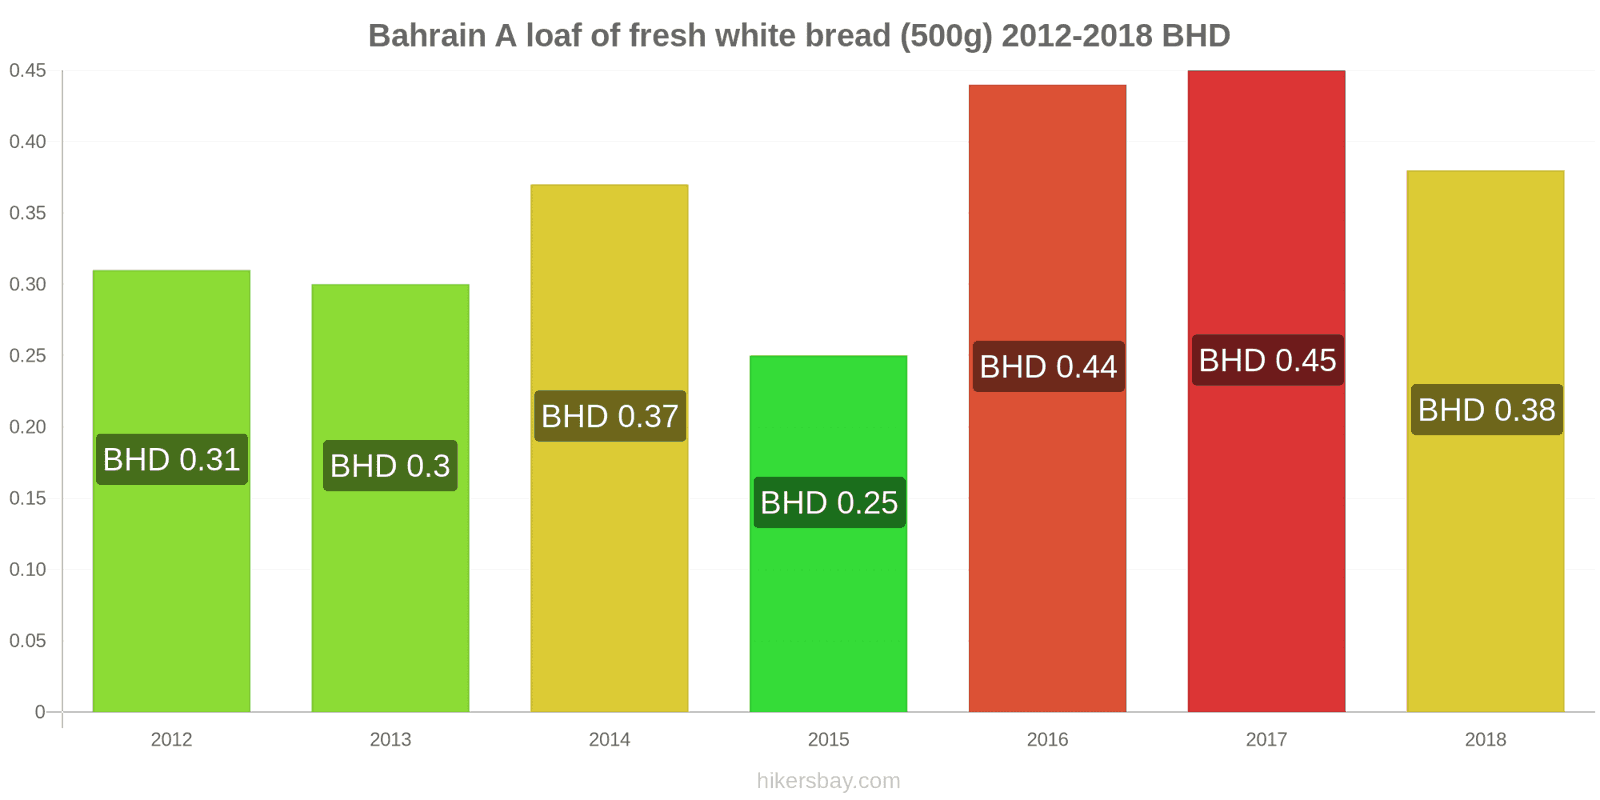 Bahrain price changes A loaf of fresh white bread (500g) hikersbay.com